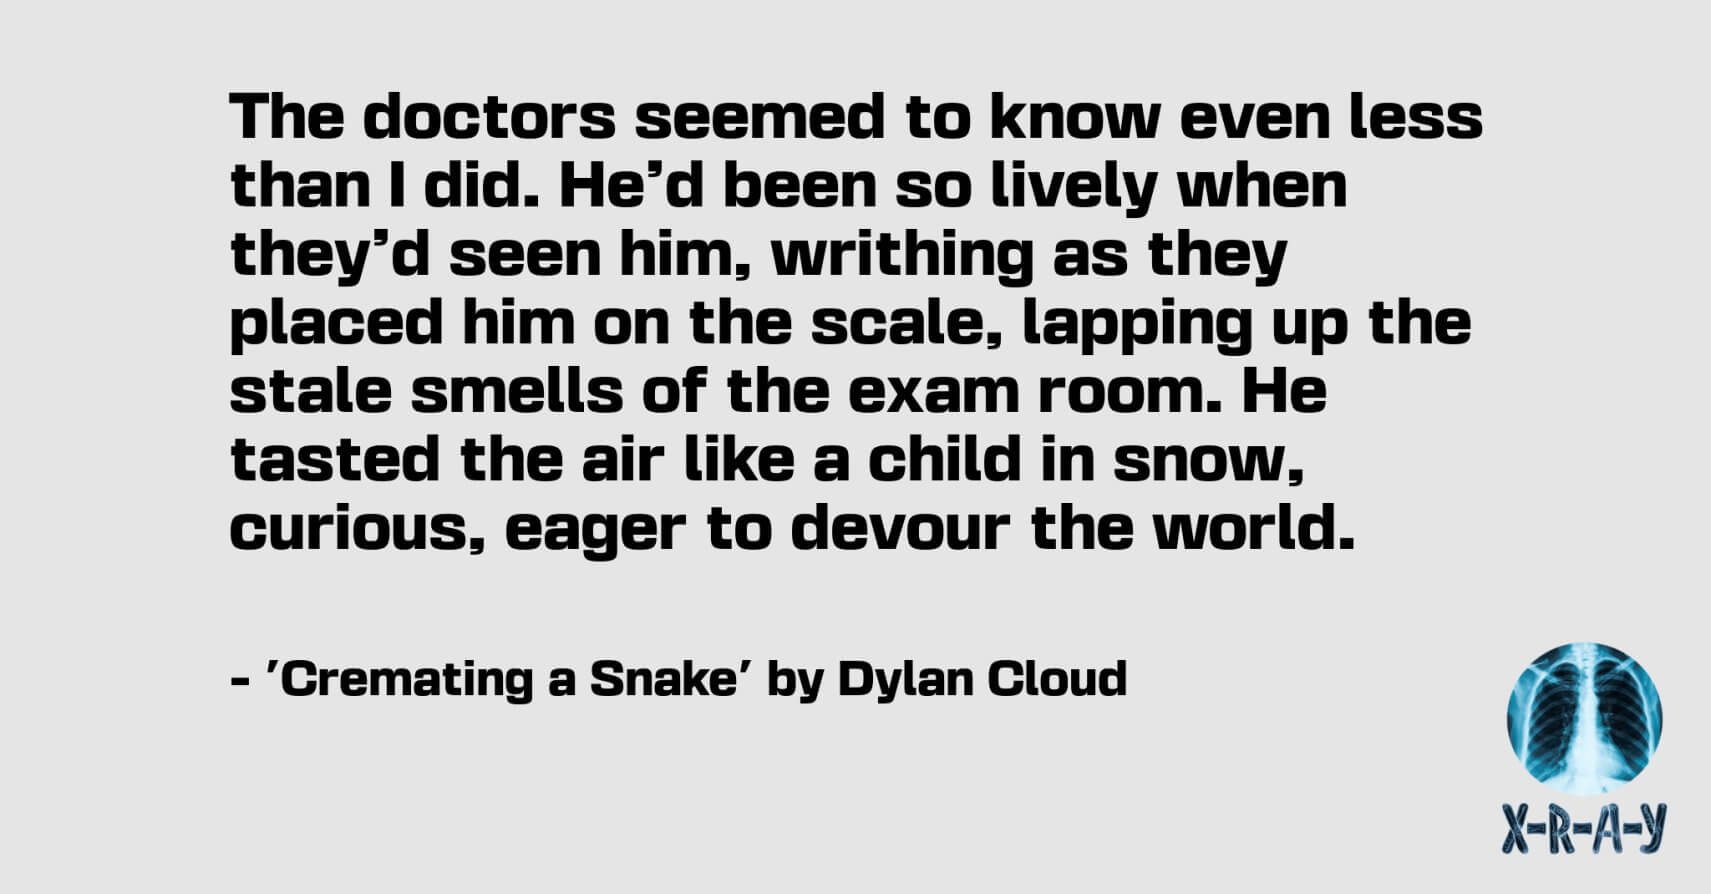 CREMATING A SNAKE by Dylan Cloud